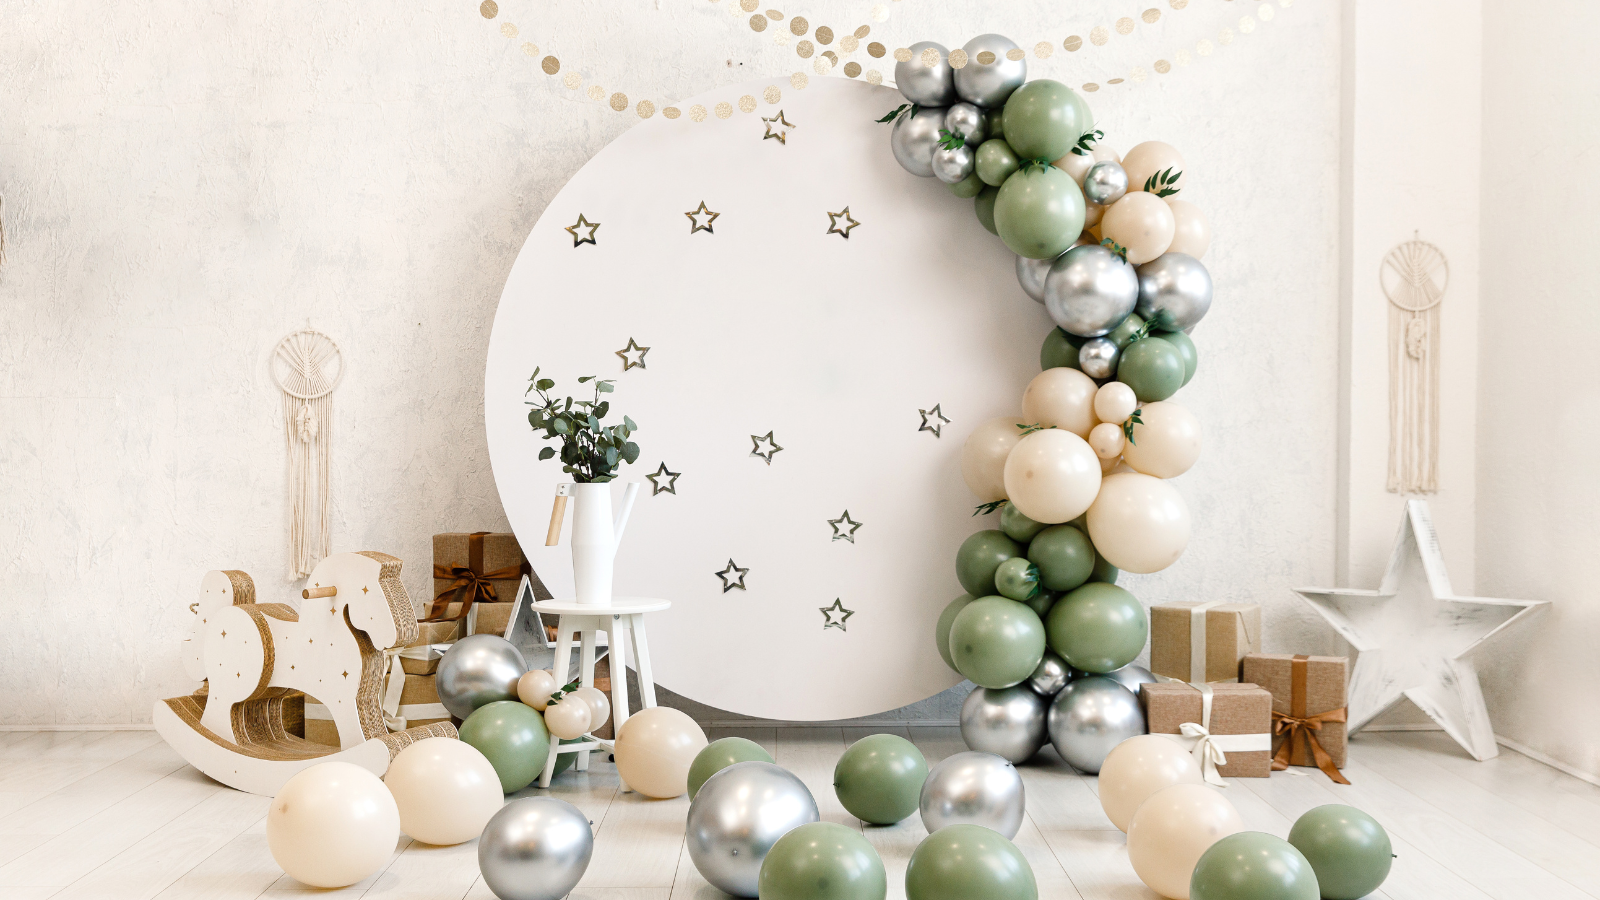 DIY Balloon Garlands: Easy Ideas to Dress Up Any Space